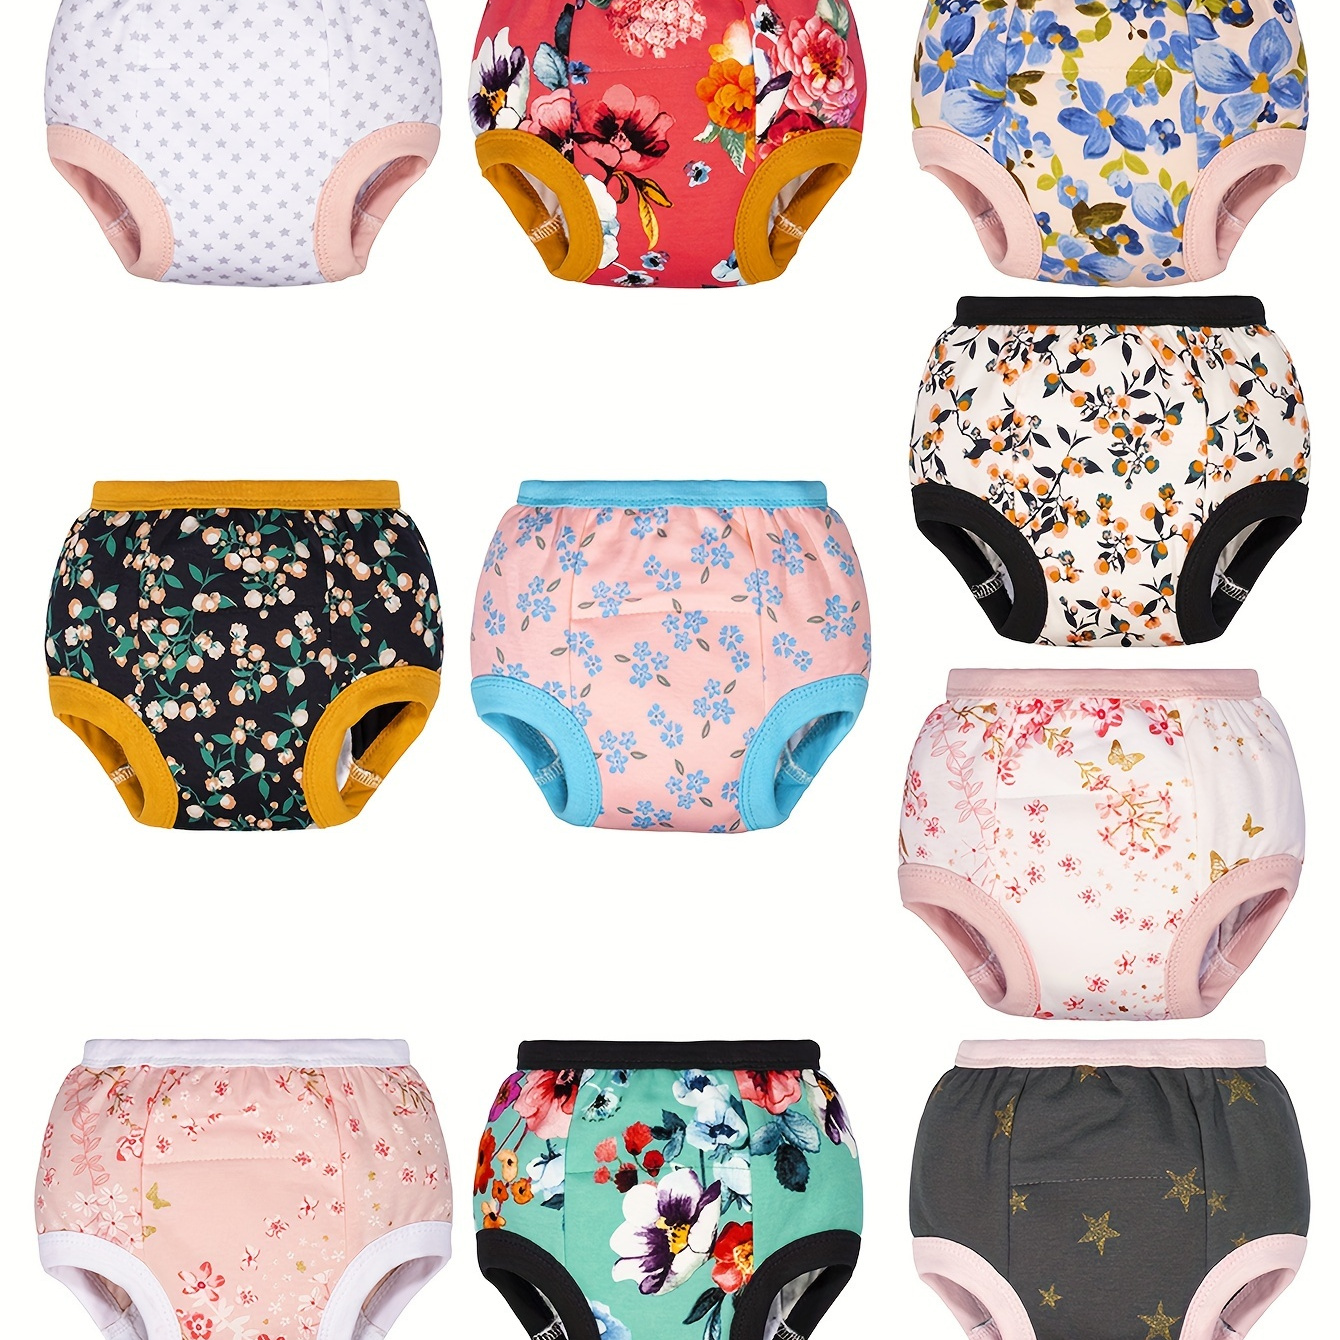 

10 Pack Baby Girls Training Underwear For Toddler 100% Cotton Training Pants Soft And Absorbent